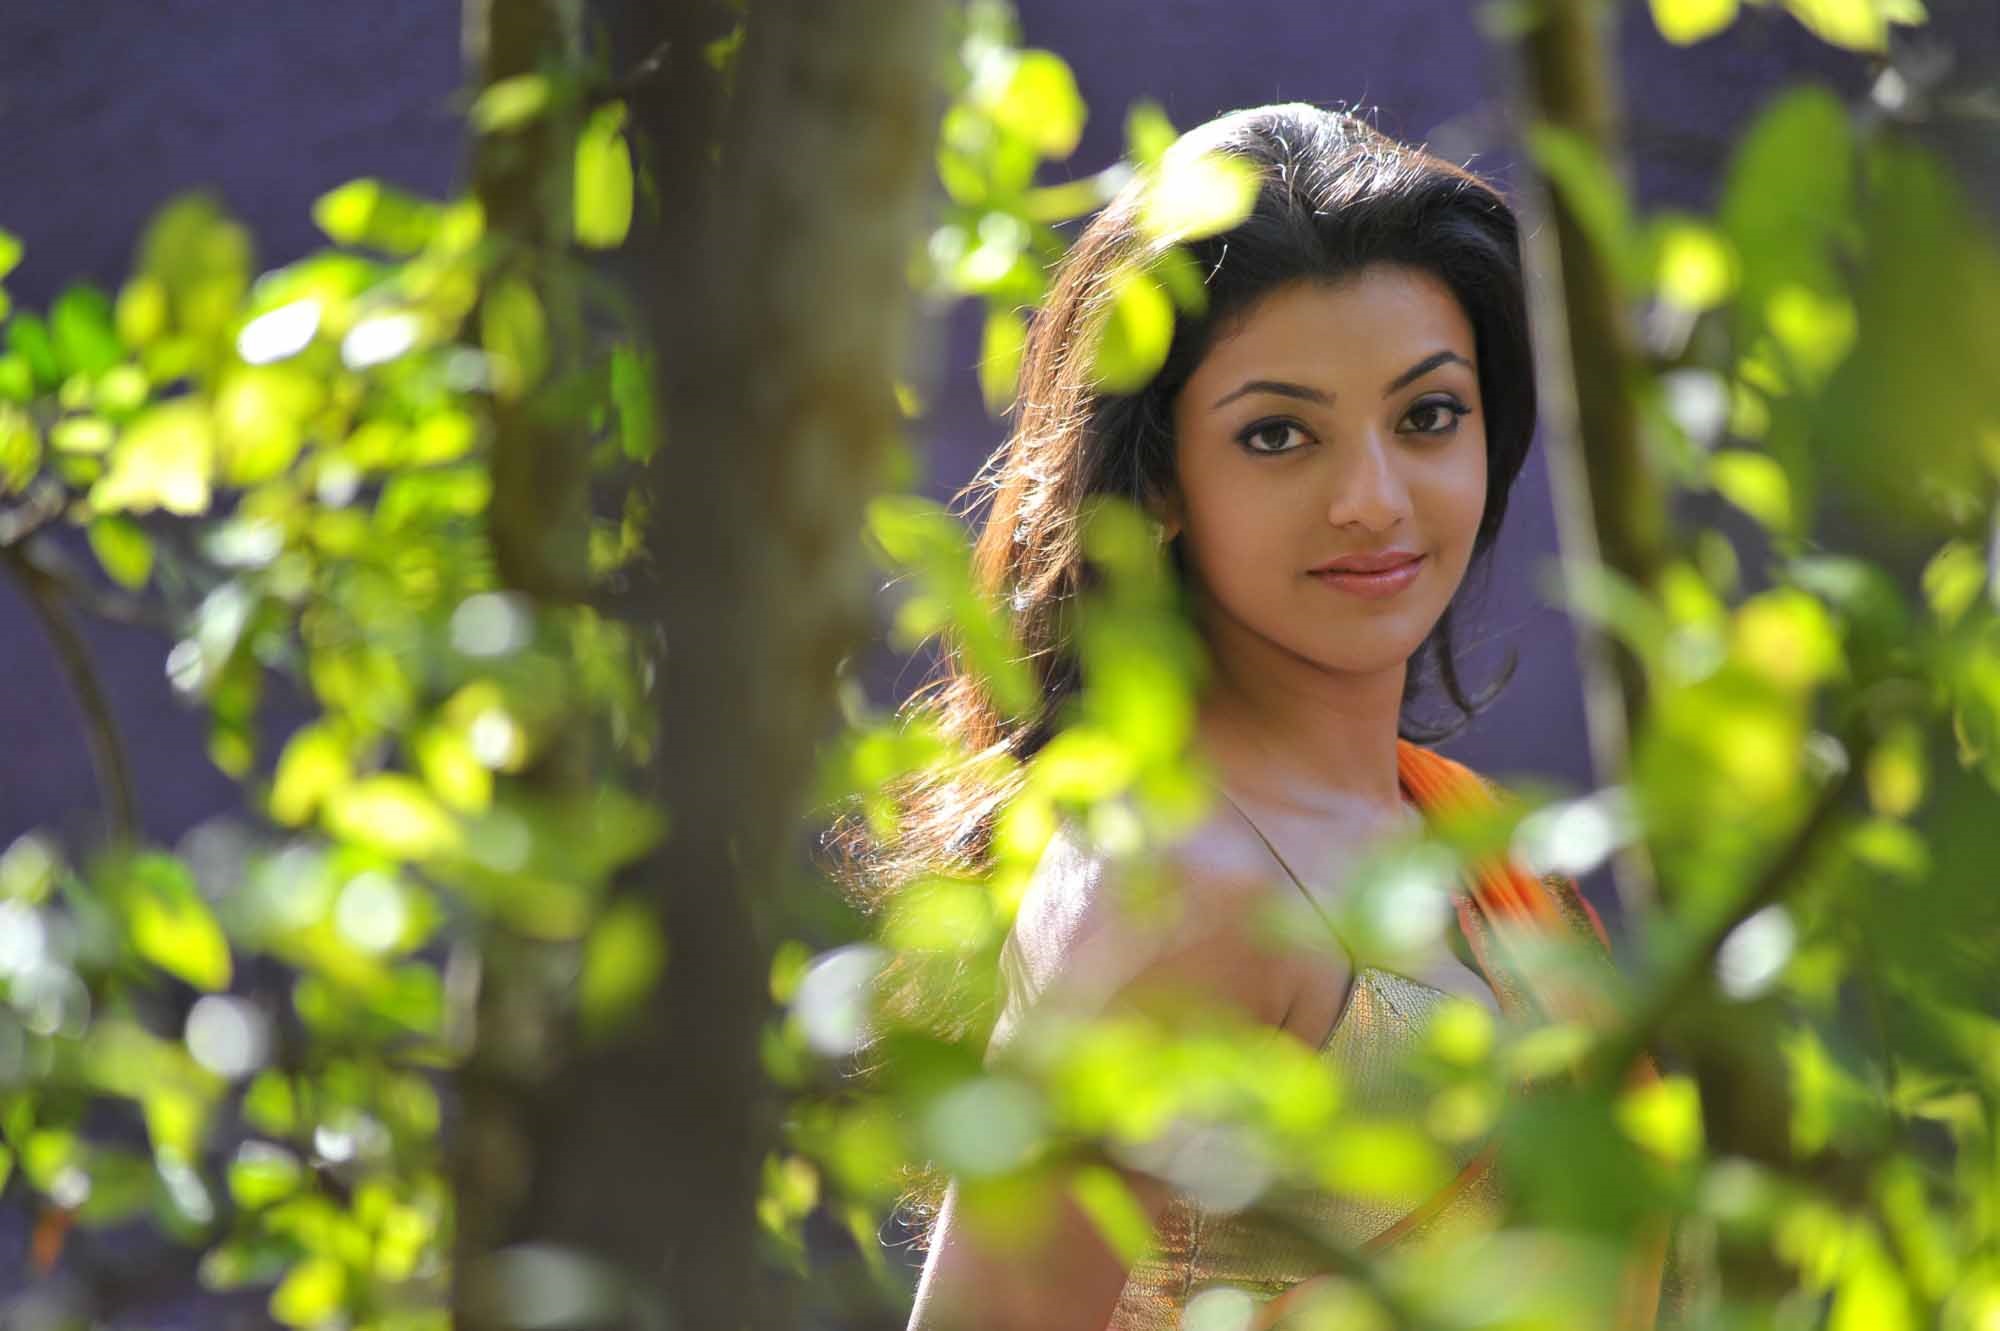 Hot HD photos of Kajal Aggarwal in Saree to tease your mood